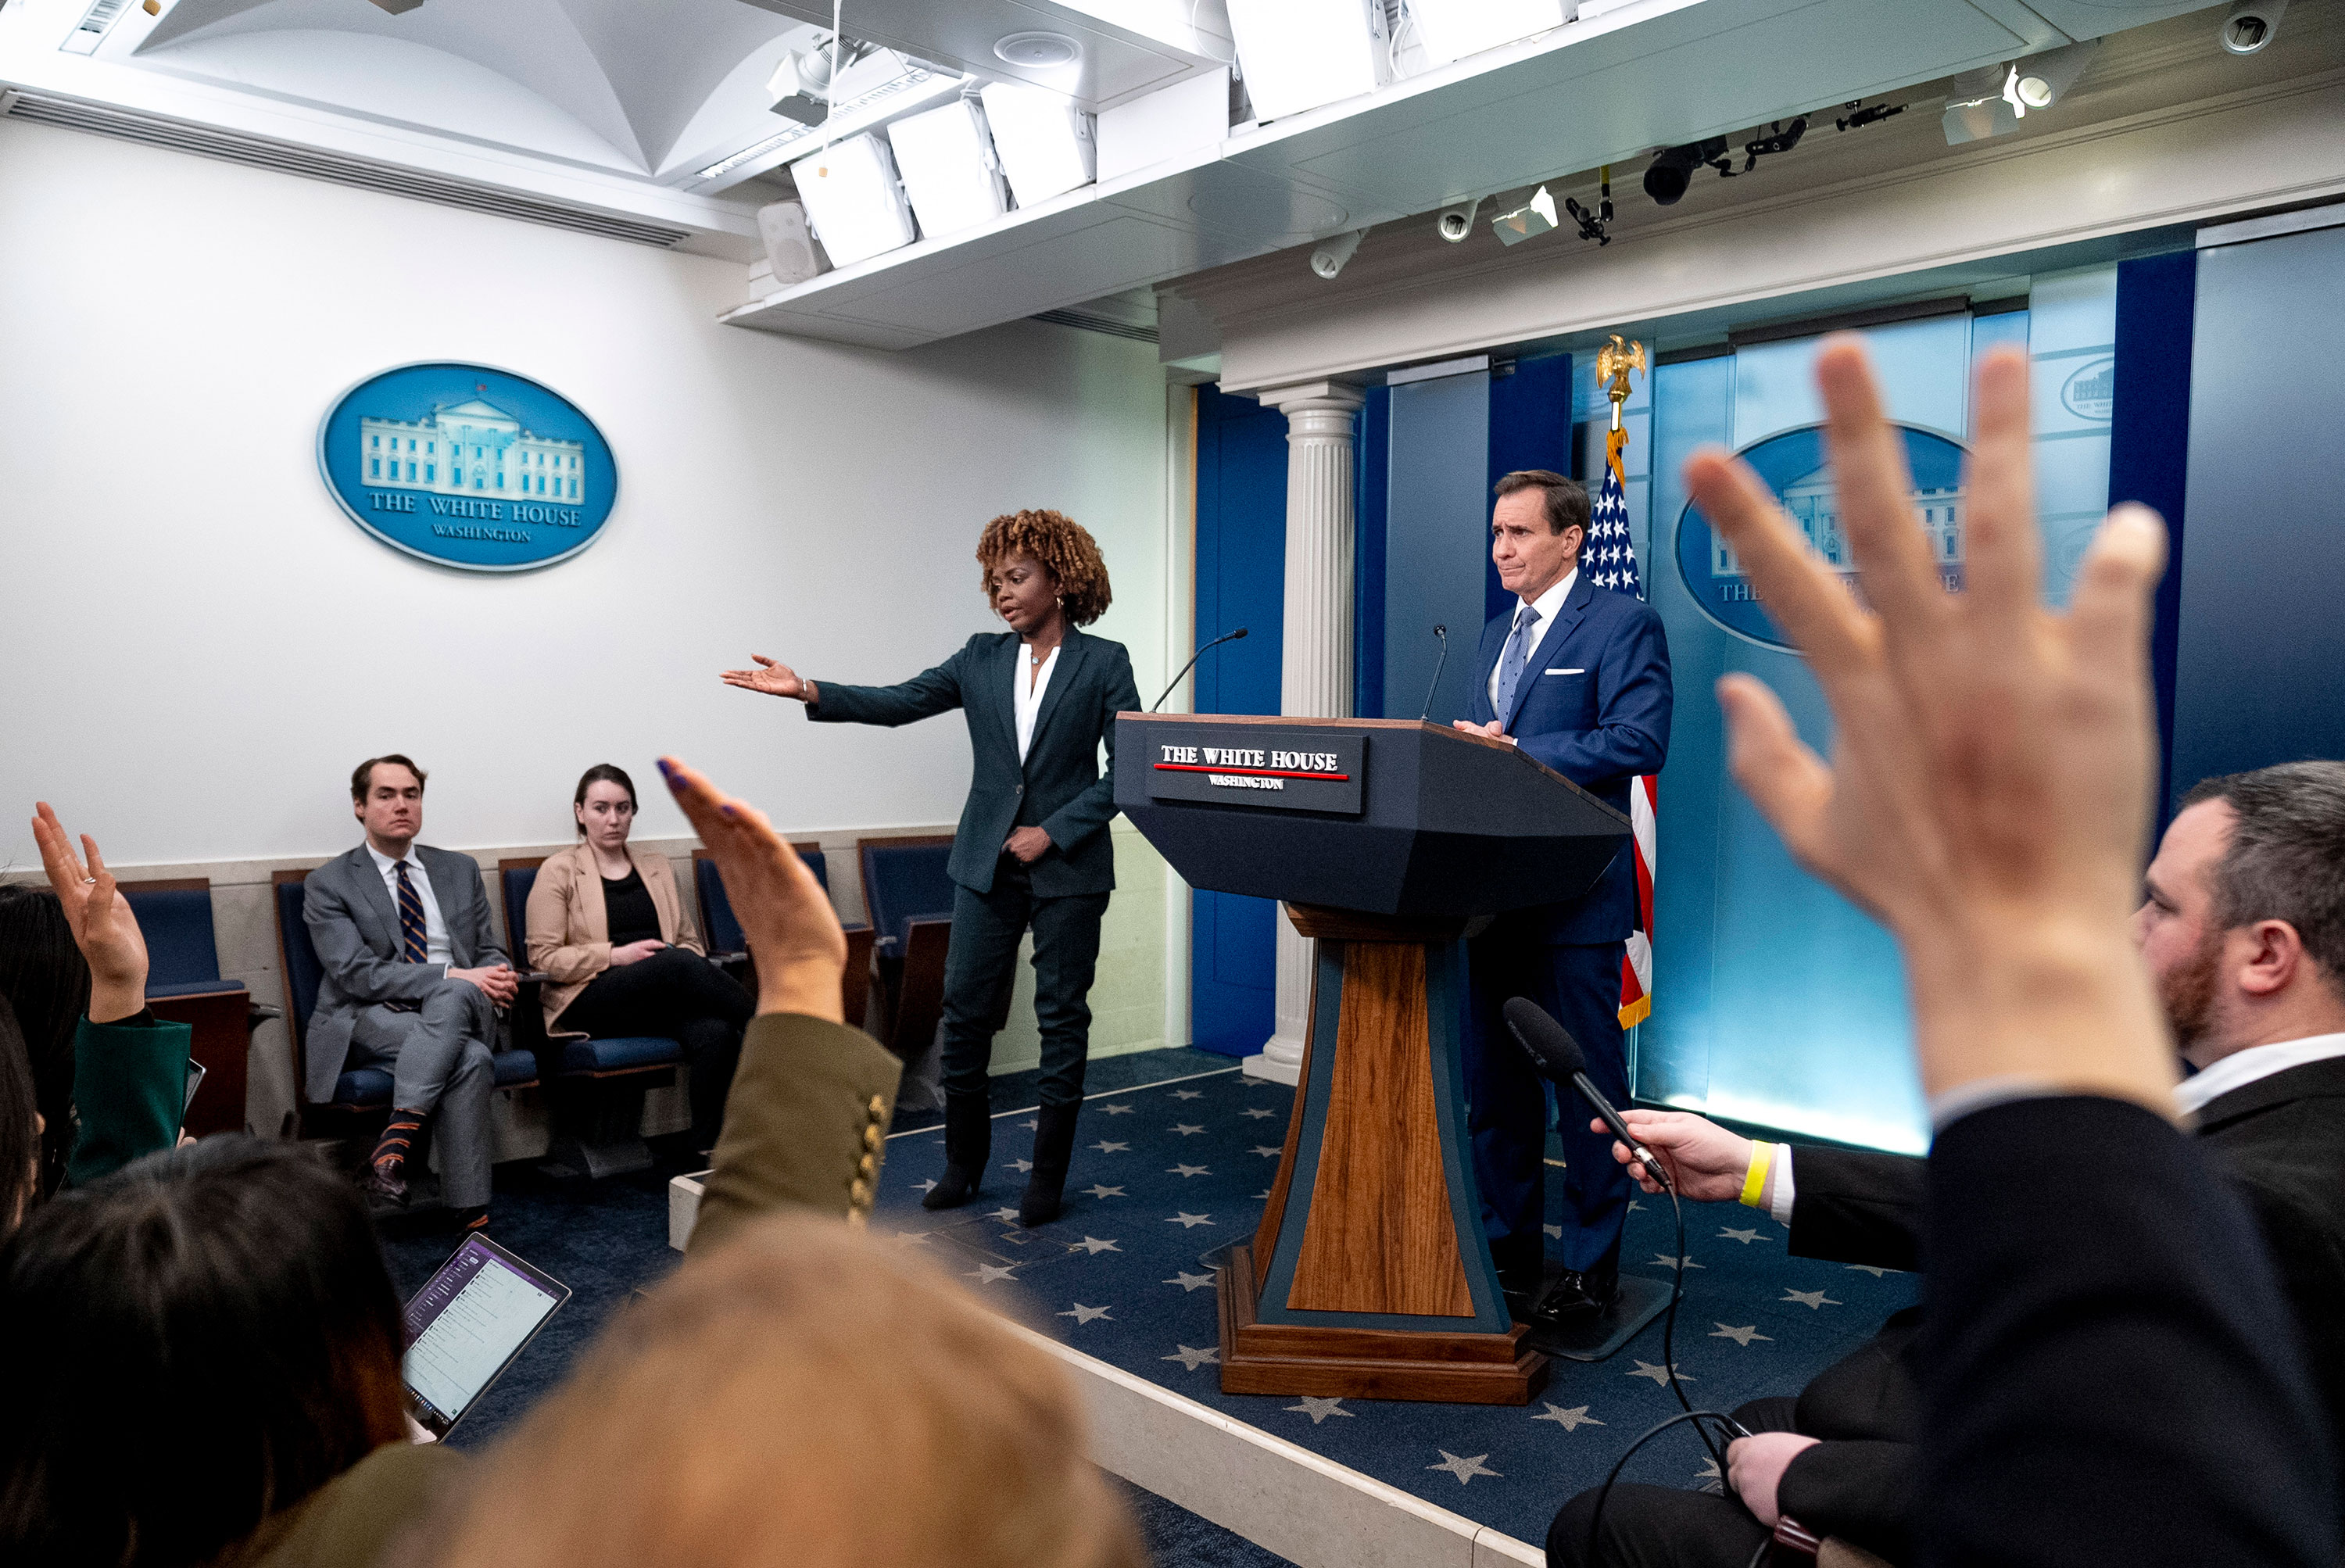 White House press secretary Karine Jean-Pierre, center, takes a question from a reporter for National Security Council spokesperson John Kirby, right, during a press briefing at the White House in Washington, DC, on March 1. 